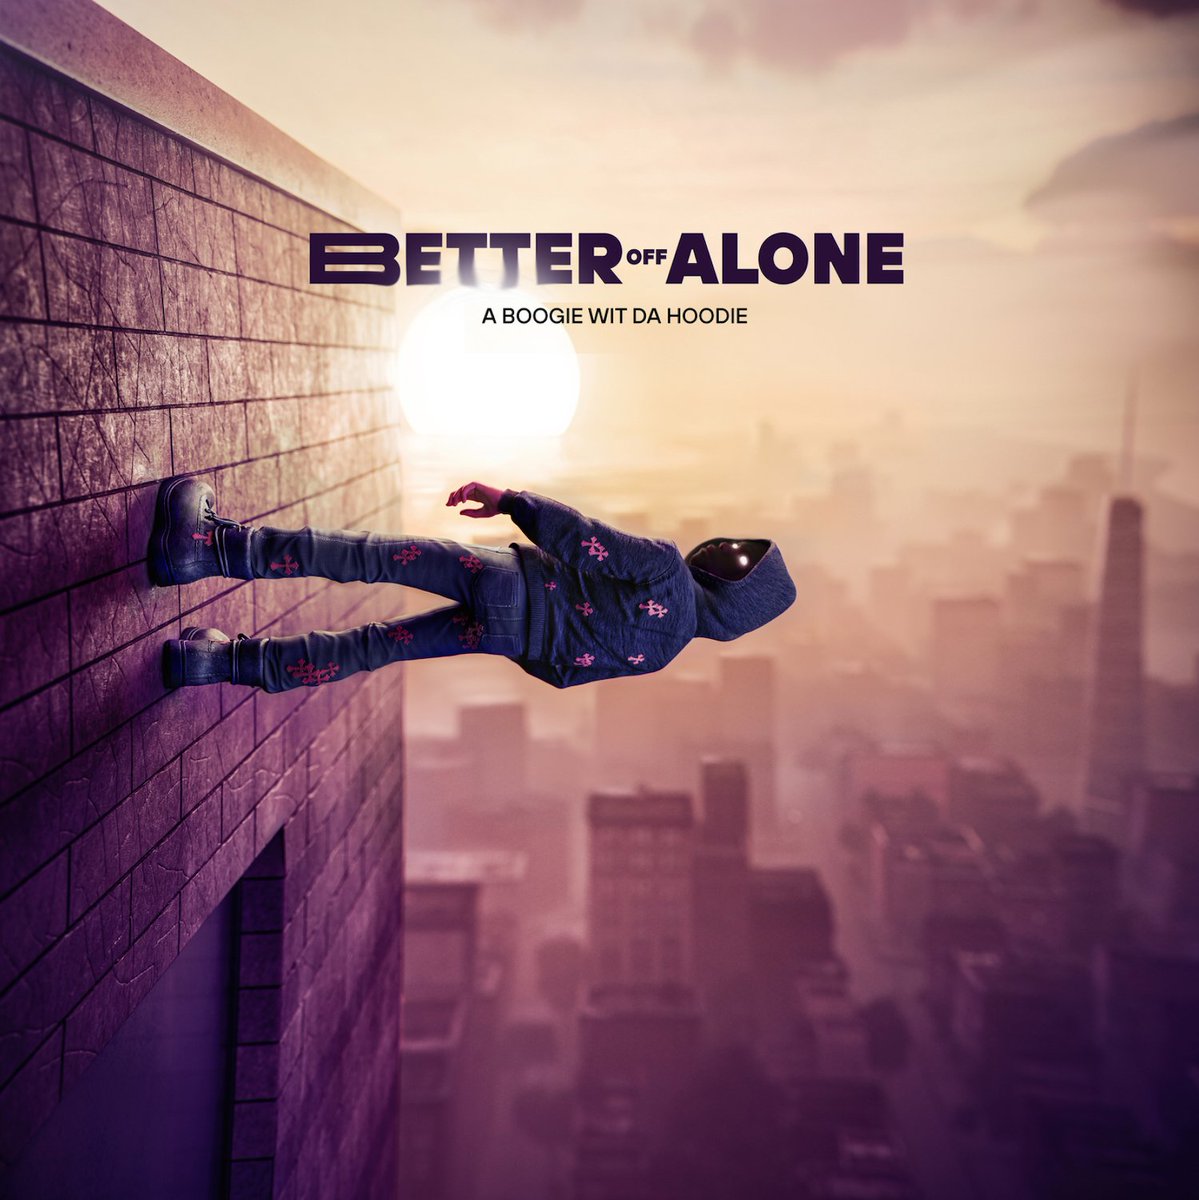 🆕 Stream @ArtistHBTL's new album Better Off Alone NOW! The Bronx, N.Y. wordsmith releases 21 songs featuring rap cameos from @lildurk, @1future, @youngthug and more. LISTEN: bit.ly/4bxJjUS